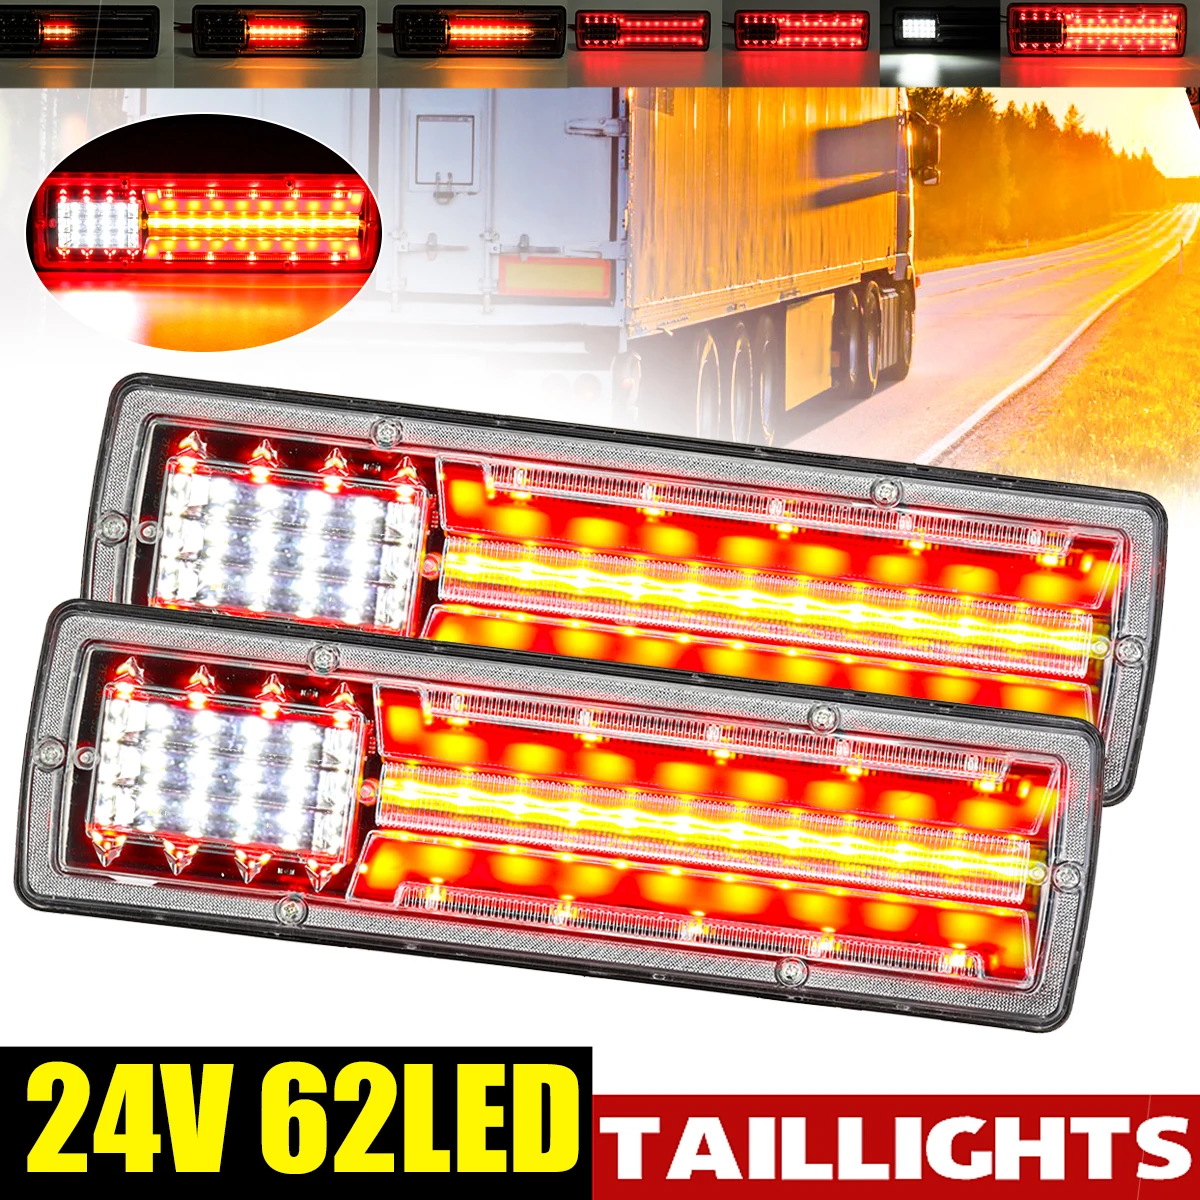 

2PCS 24V Dynamic LED Car Truck Tail Light Turn Signal Rear Brake Light Reverse Signal Lamp Tractor Trailer Lorry Bus Campers